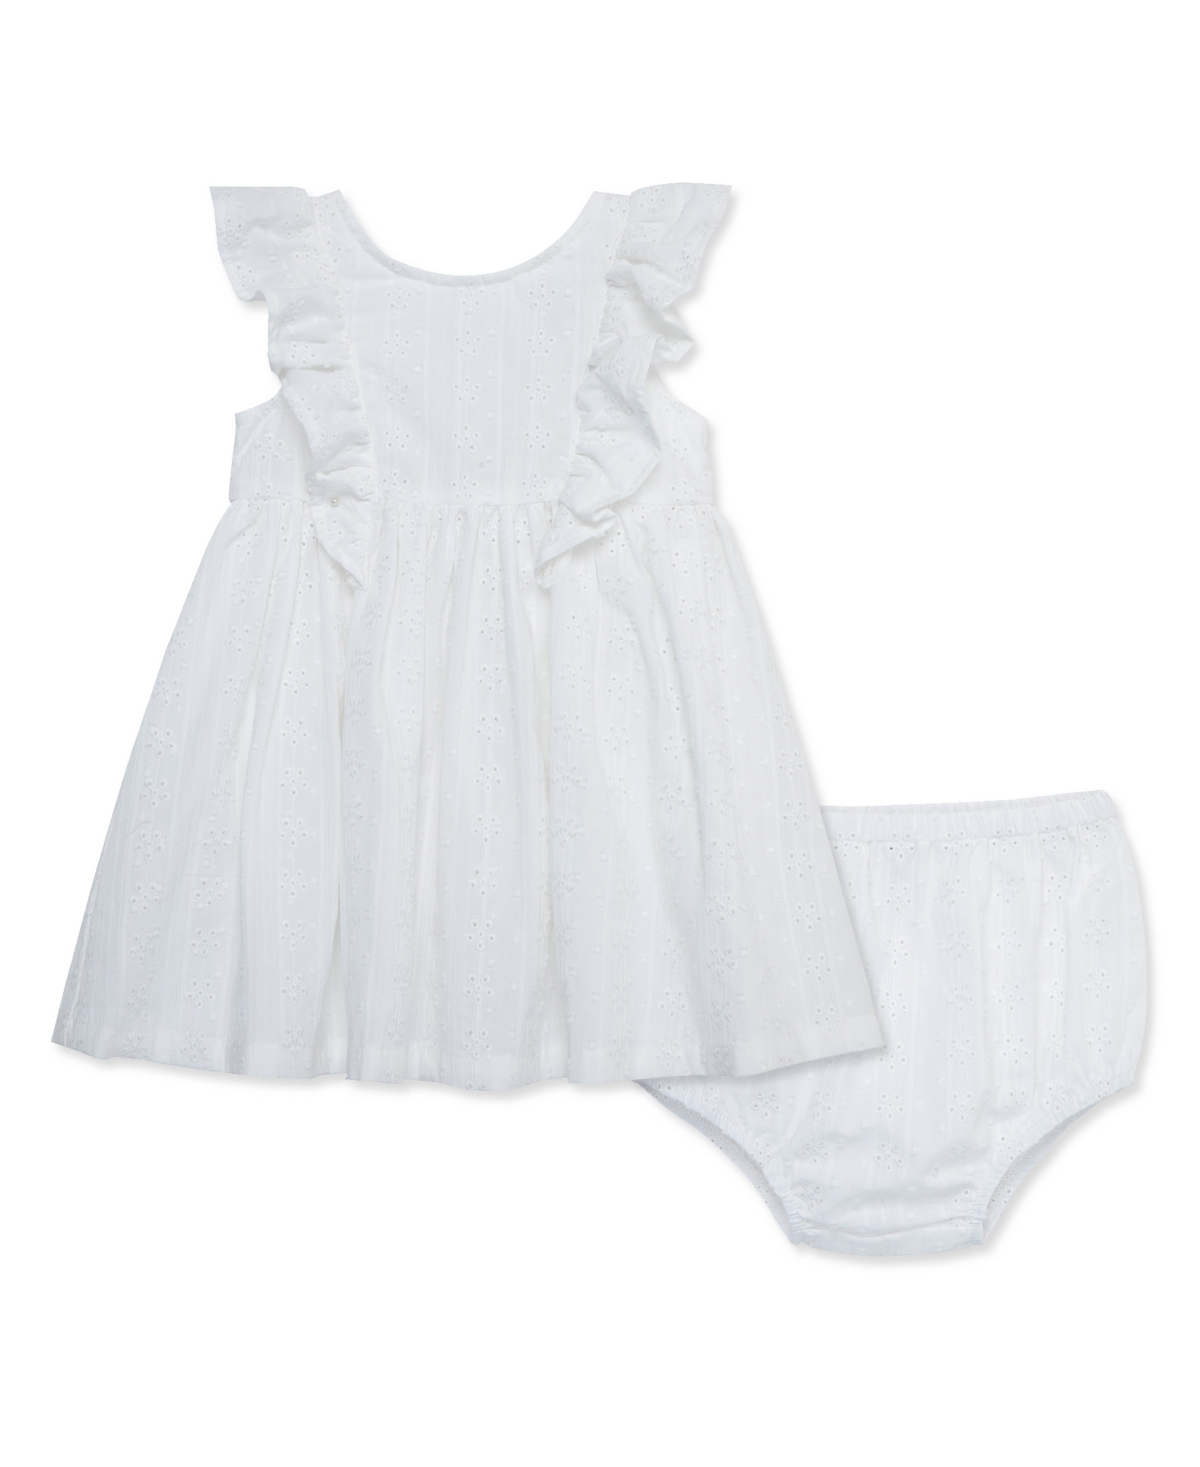 Shop Little Me Baby Girls White Embroidered Sundress